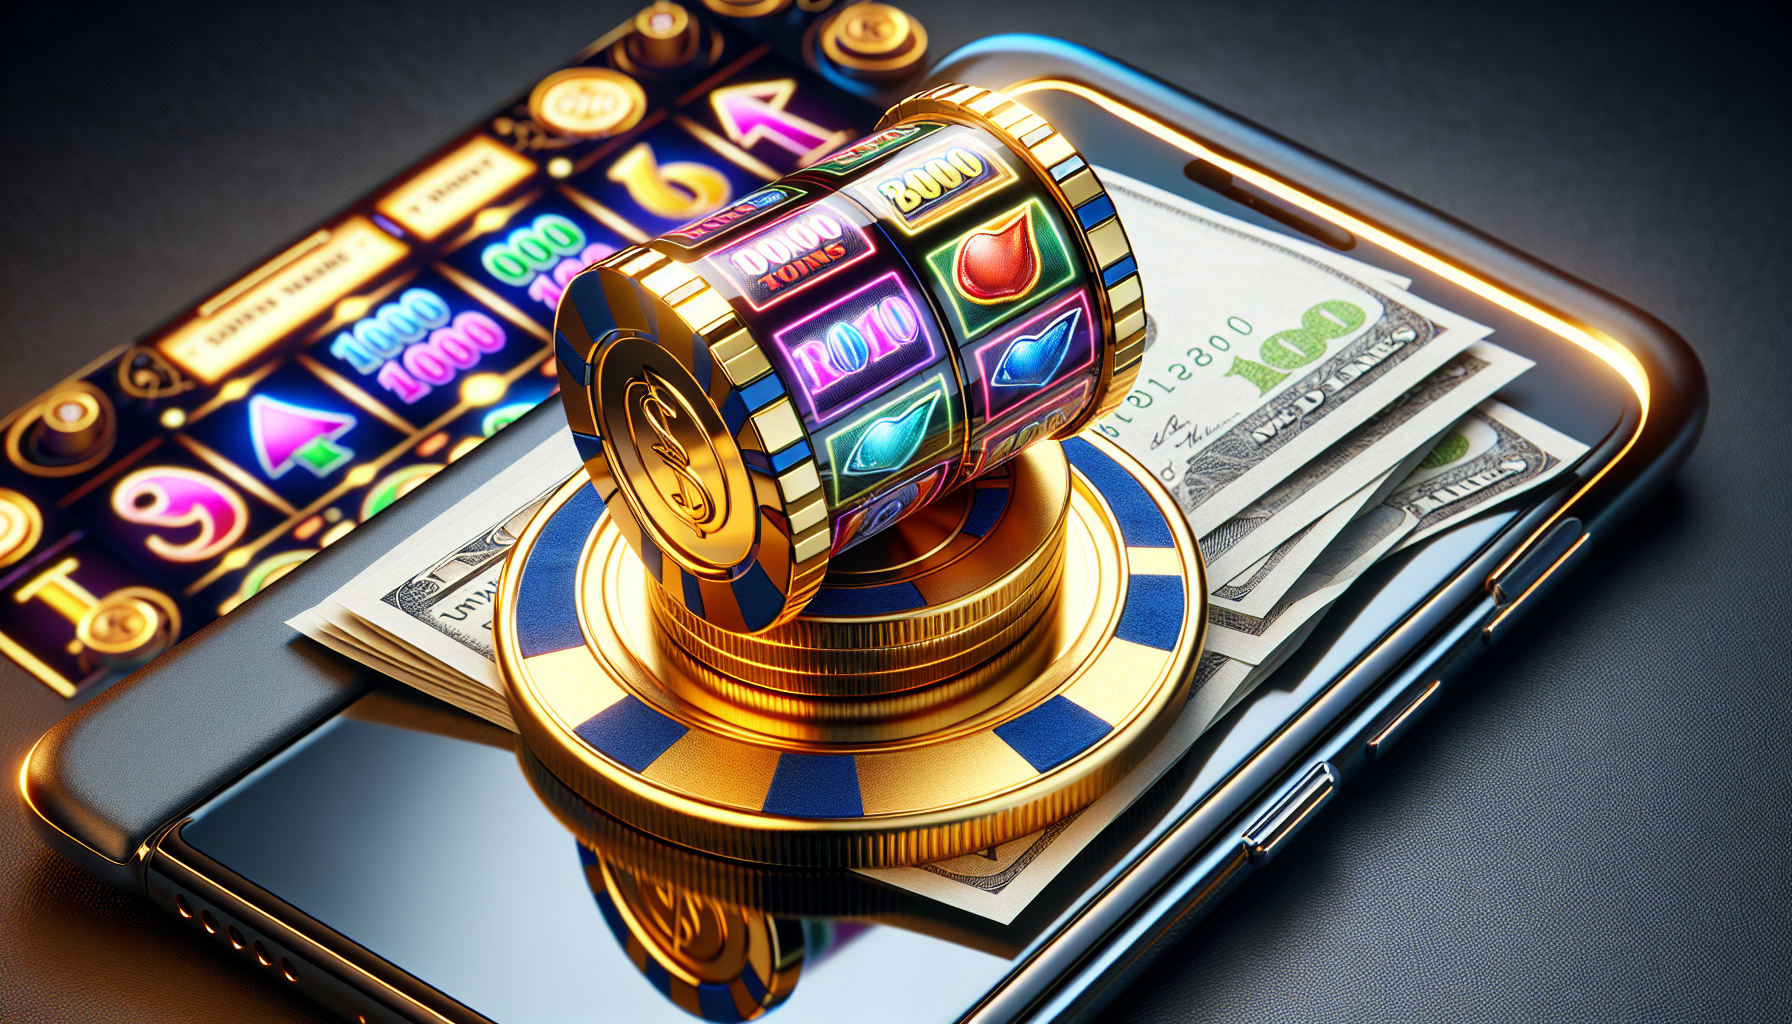 Can You Win Real Money On Mobile Slots?